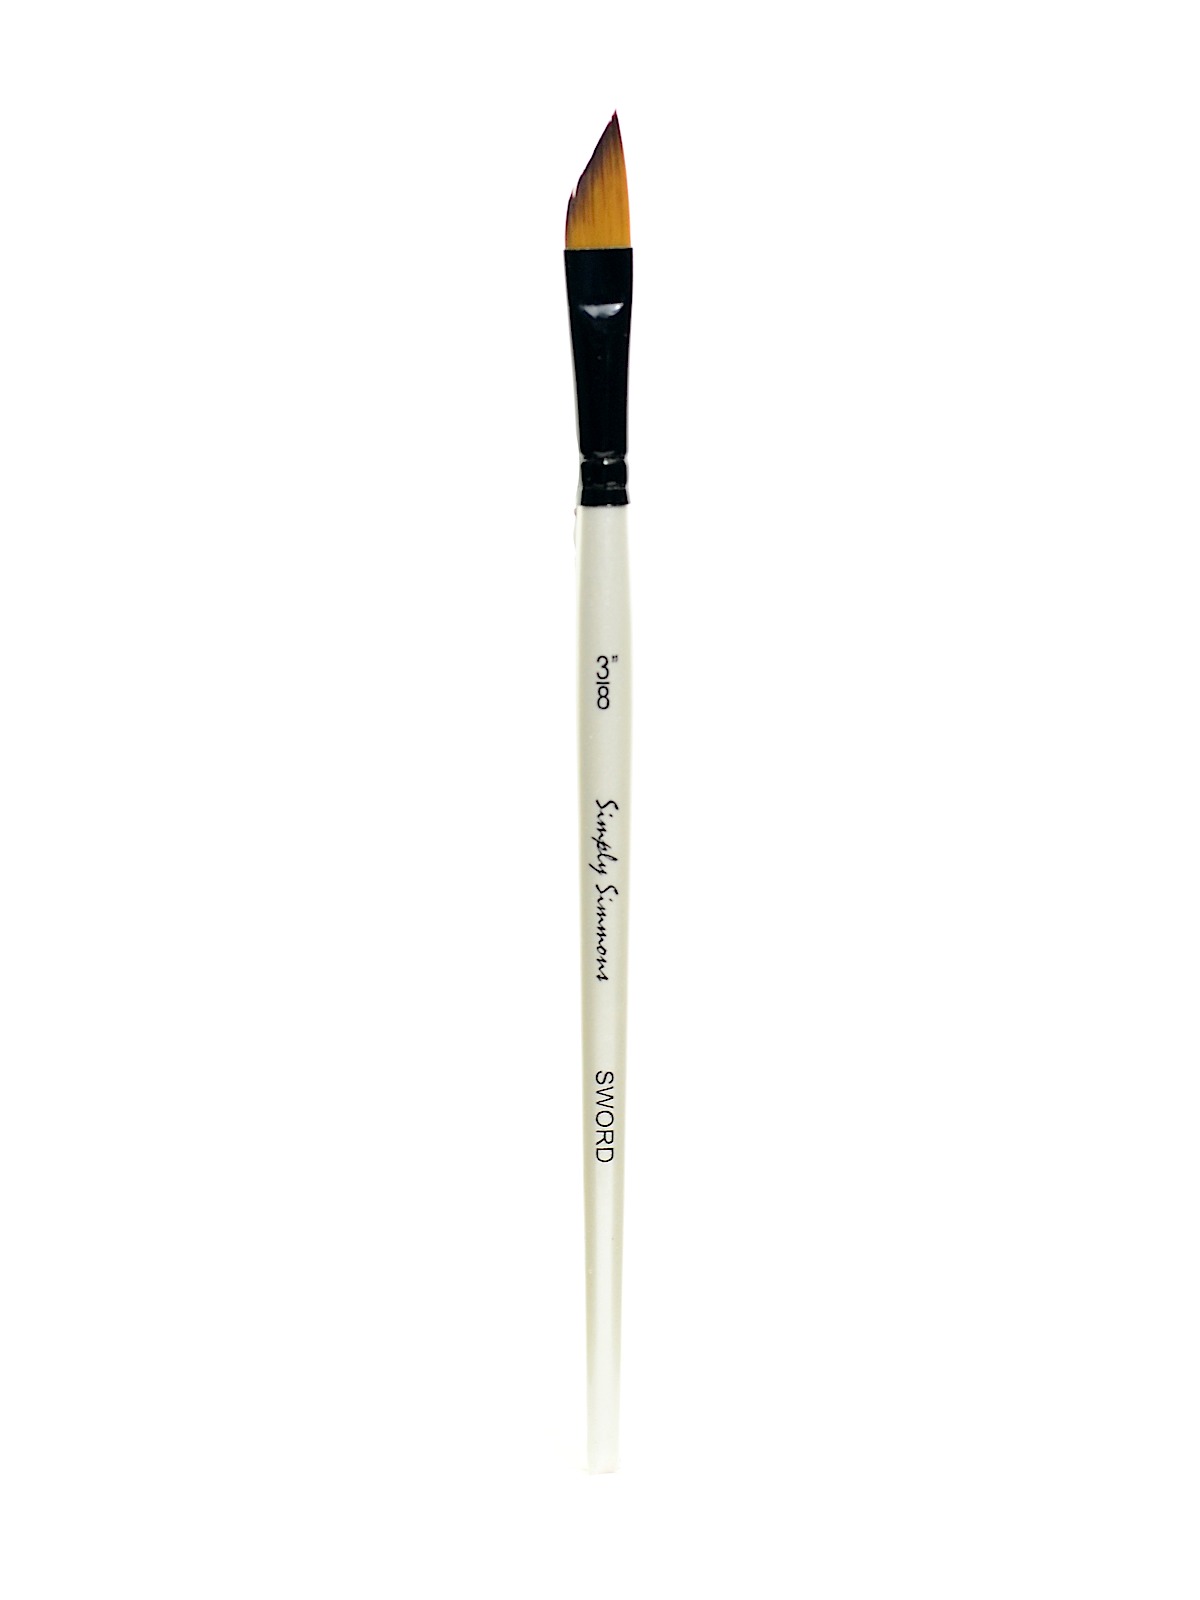 Simply Simmons Short Handle Brushes Sword 3 8 In.